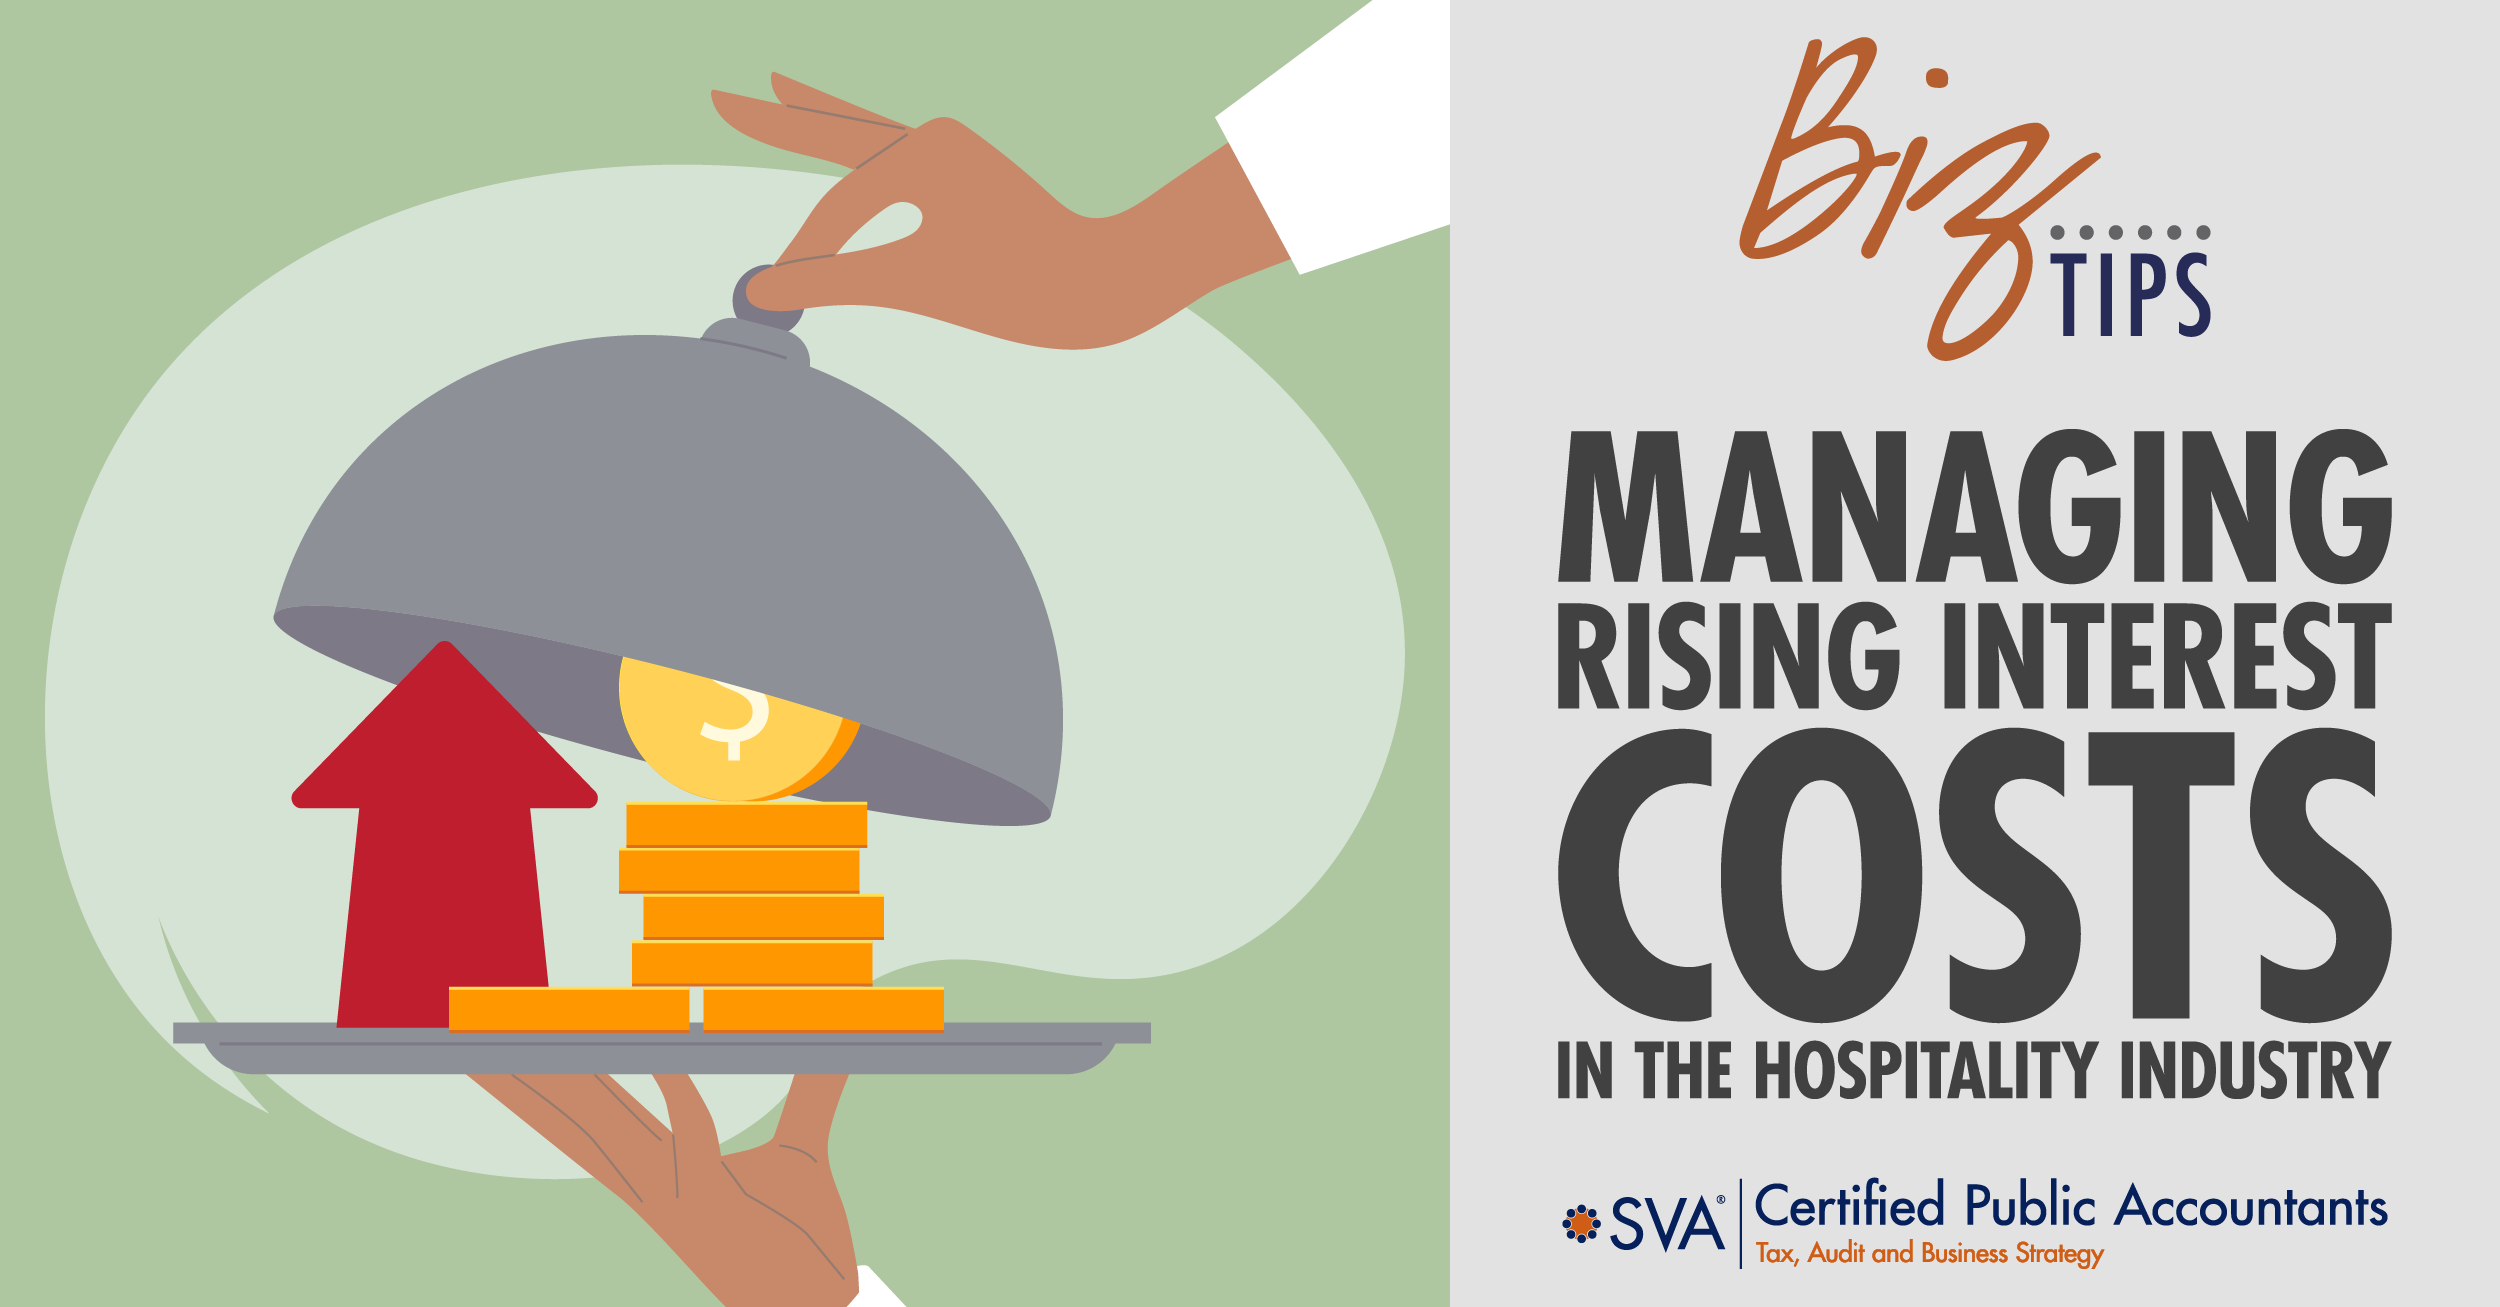 Managing Rising Interest Costs in the Hospitality Industry